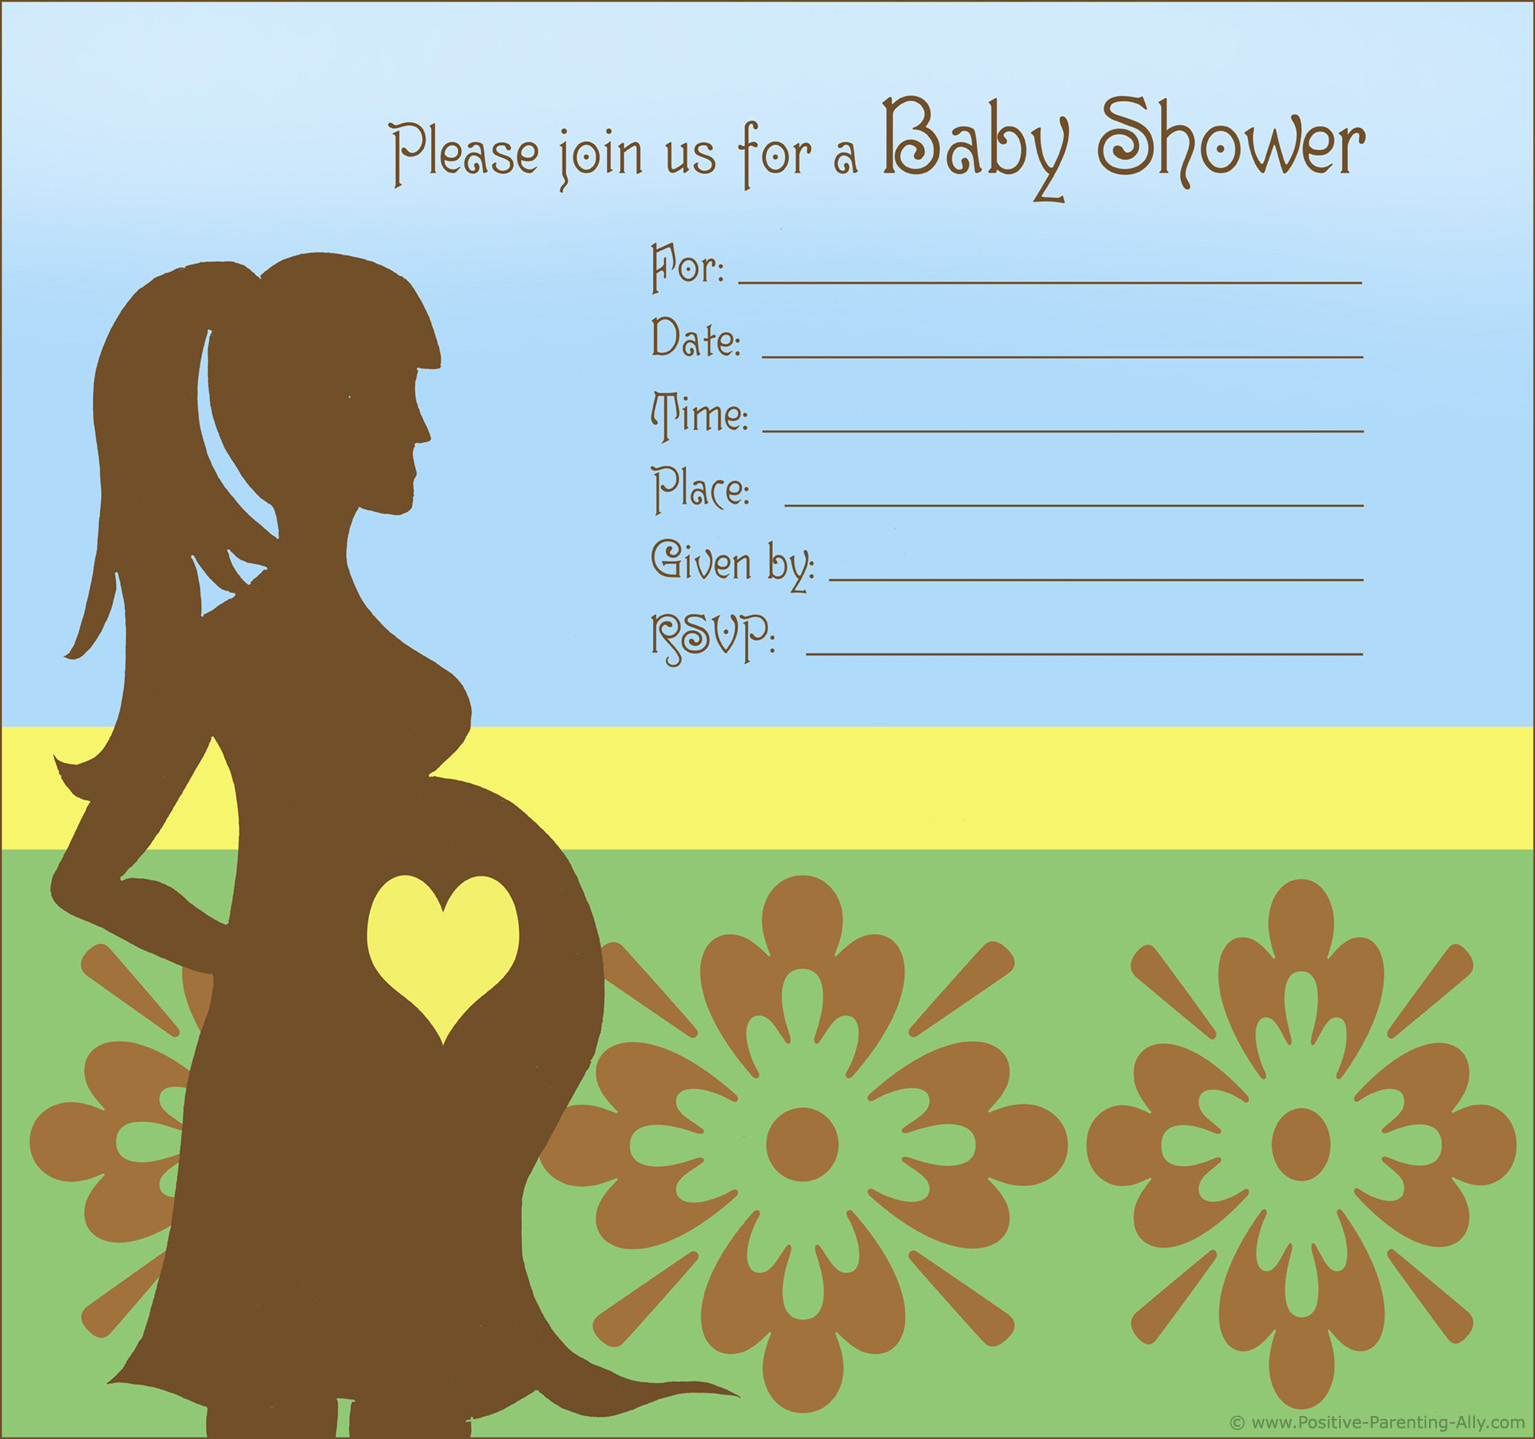 baby-shower-online-invitations-11-free-jungle-gold-baby-shower